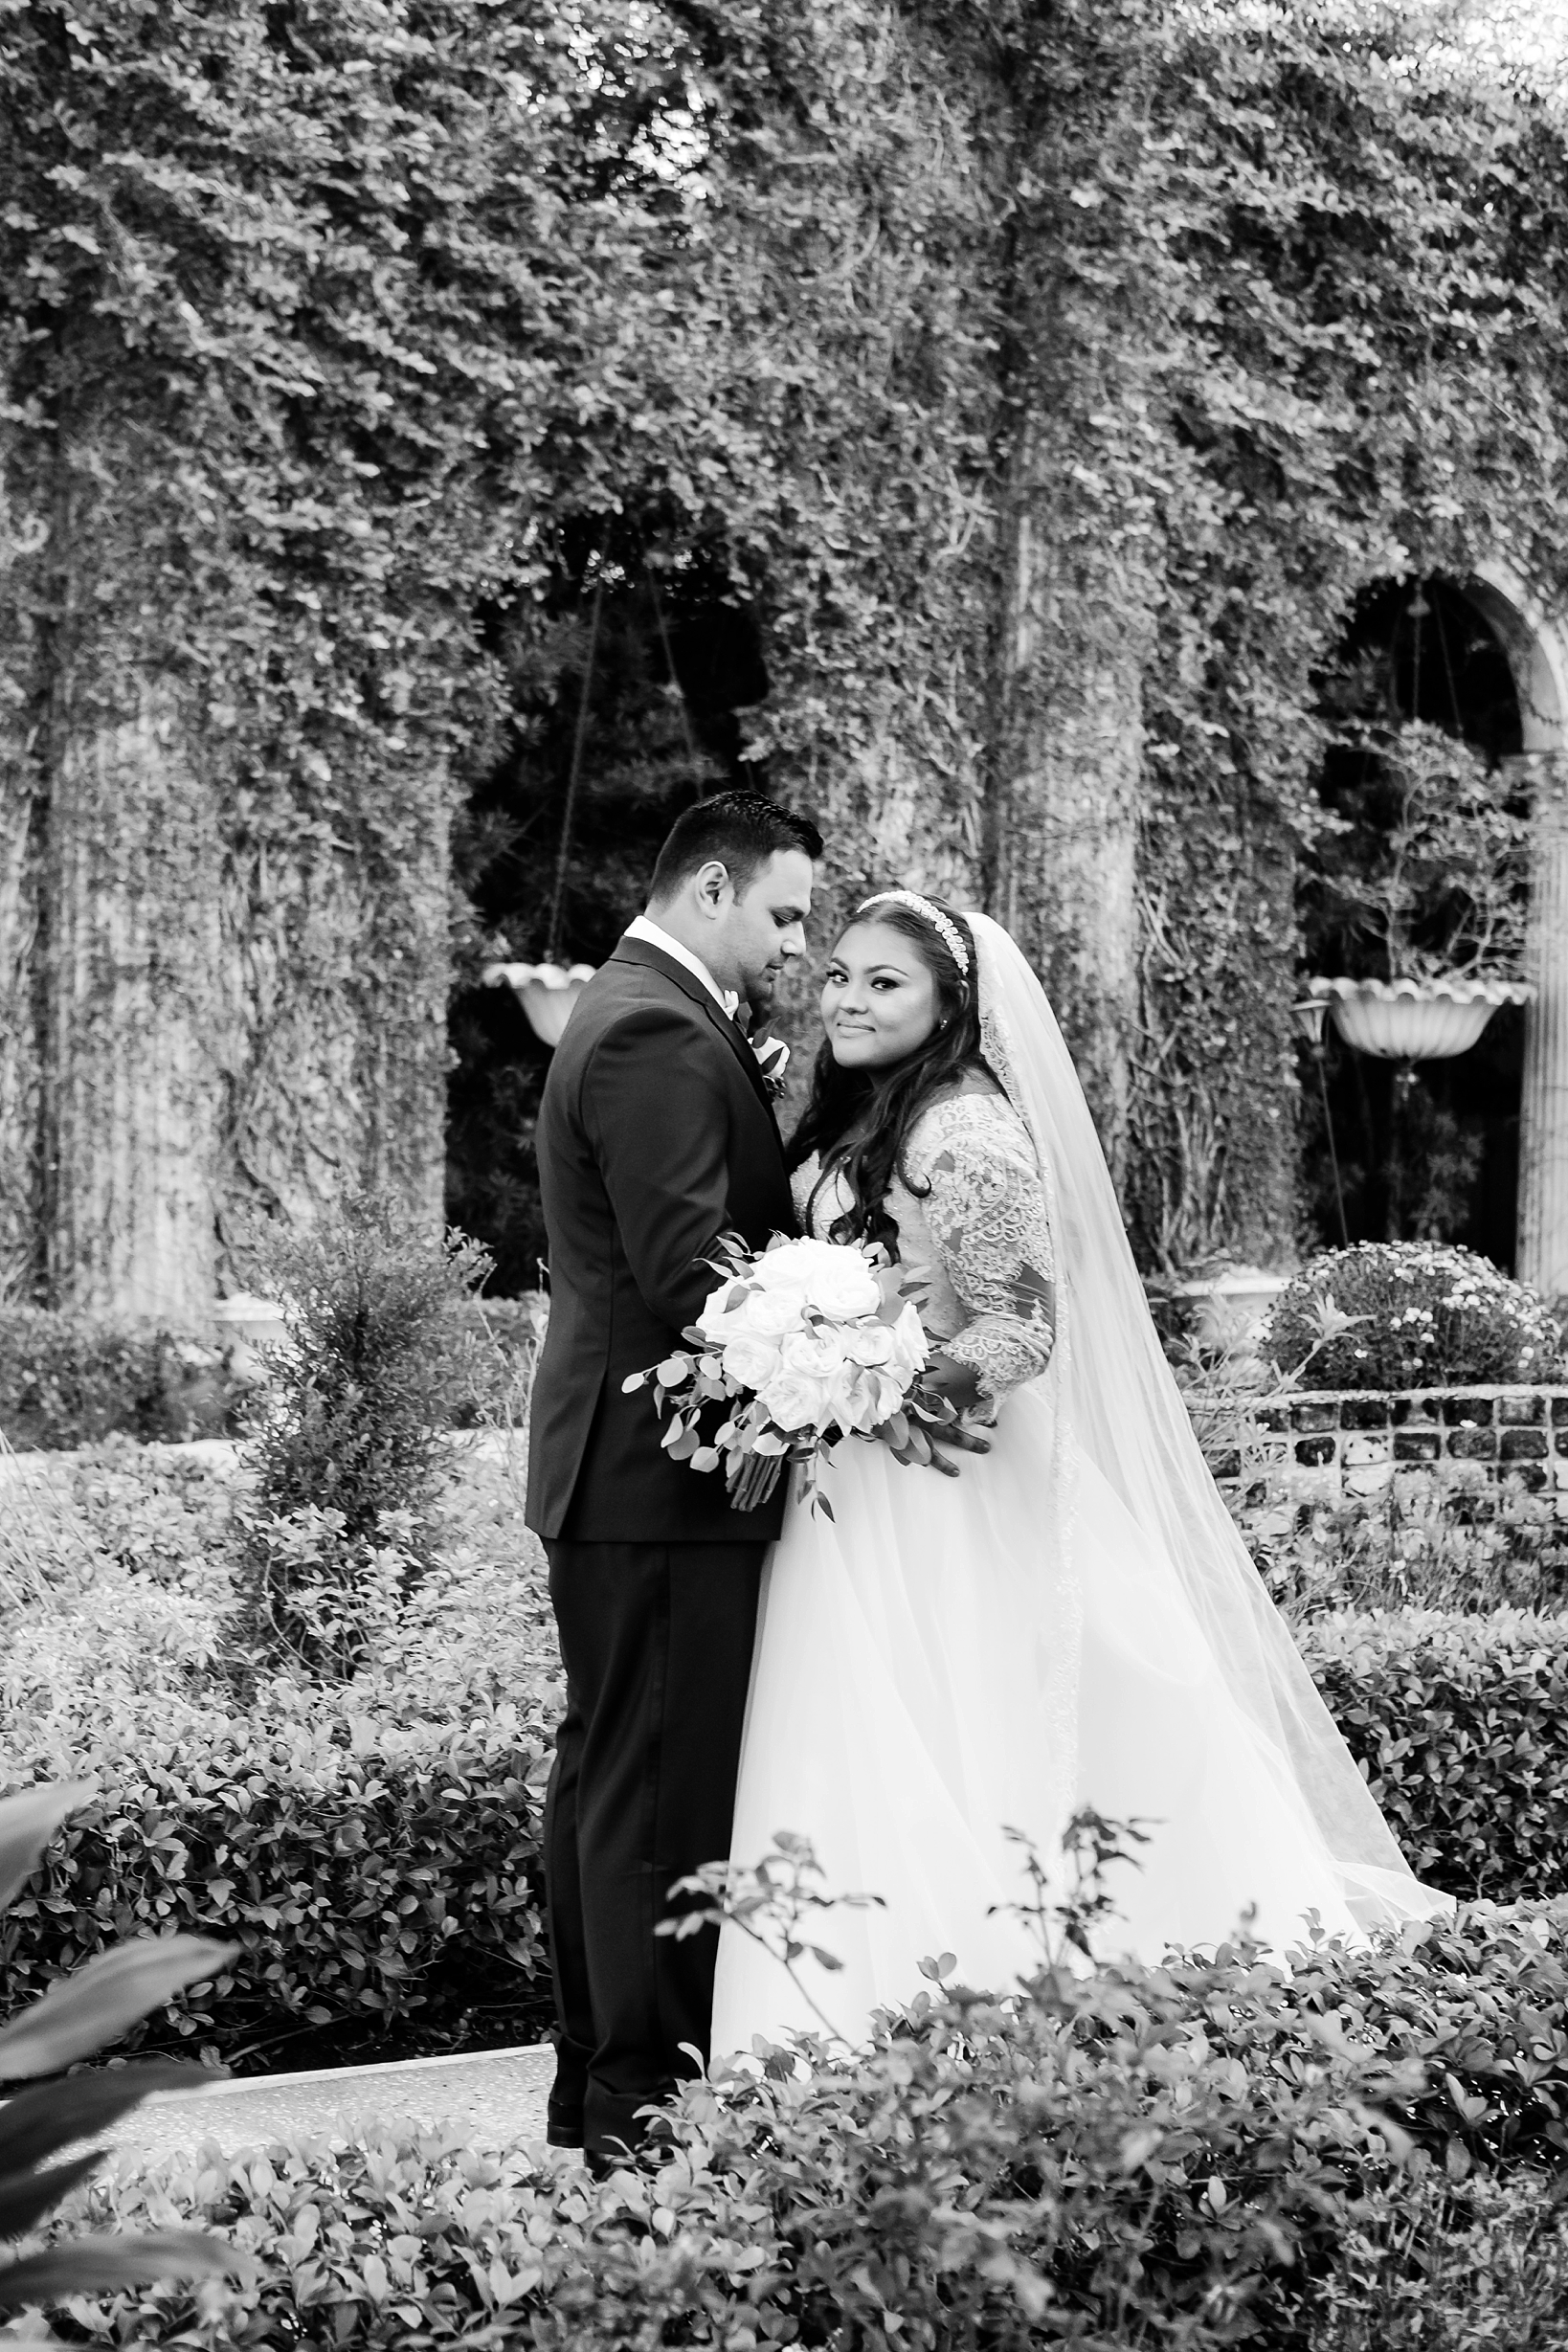 Timeless black and white photo of the bride and groom in the gardens of the Kapok Tree by sarahben.com